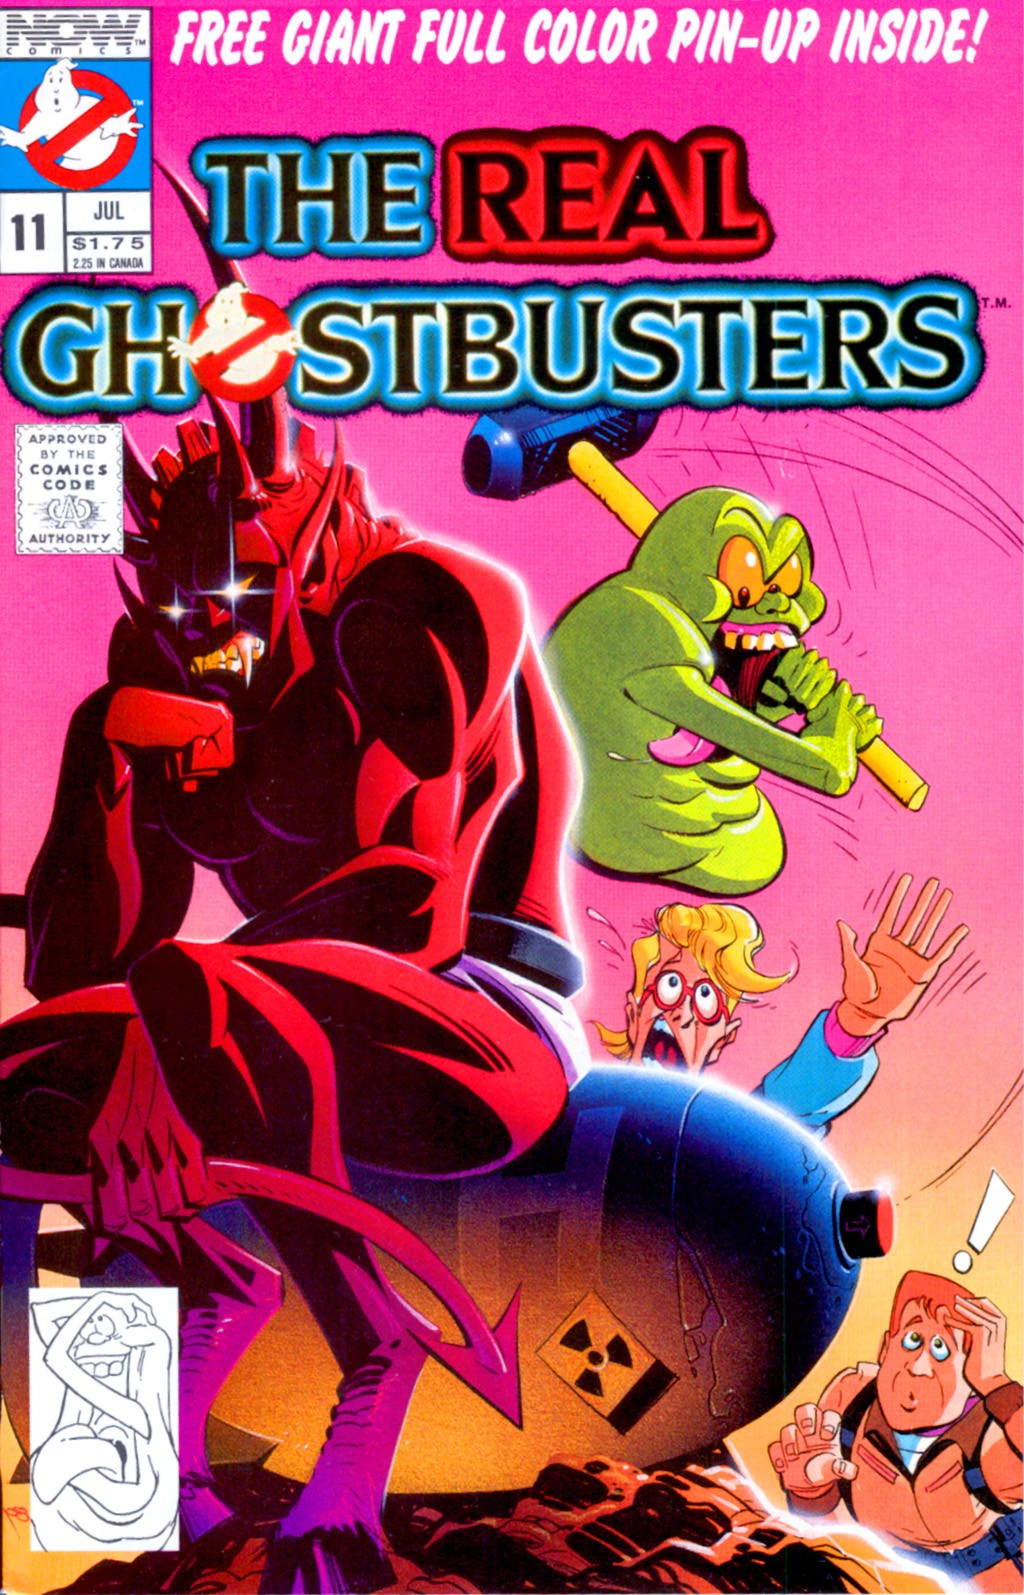 Read online Real Ghostbusters comic -  Issue #11 - 1